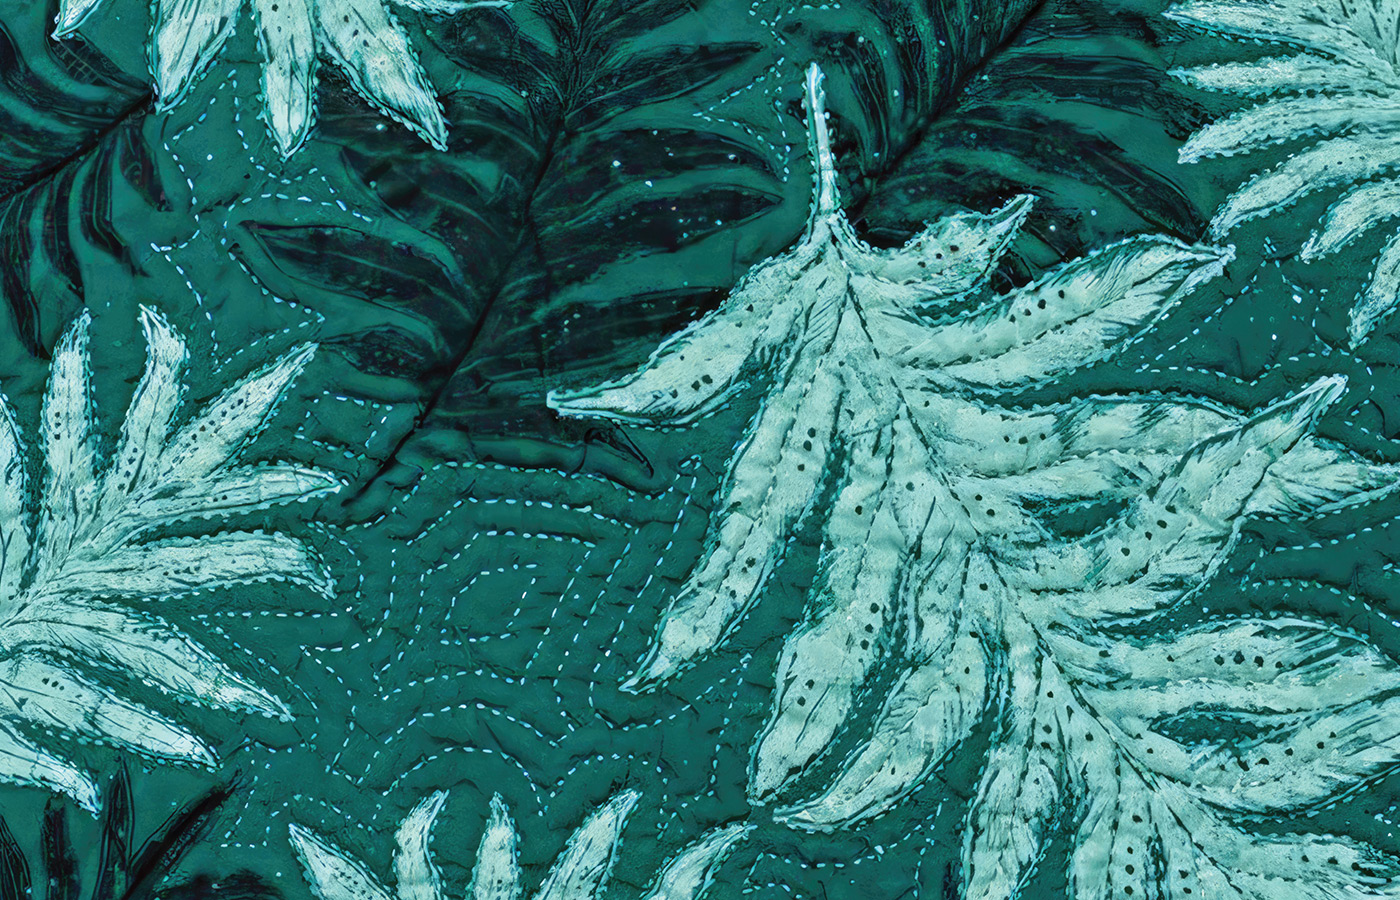 A quilt of green leaves.